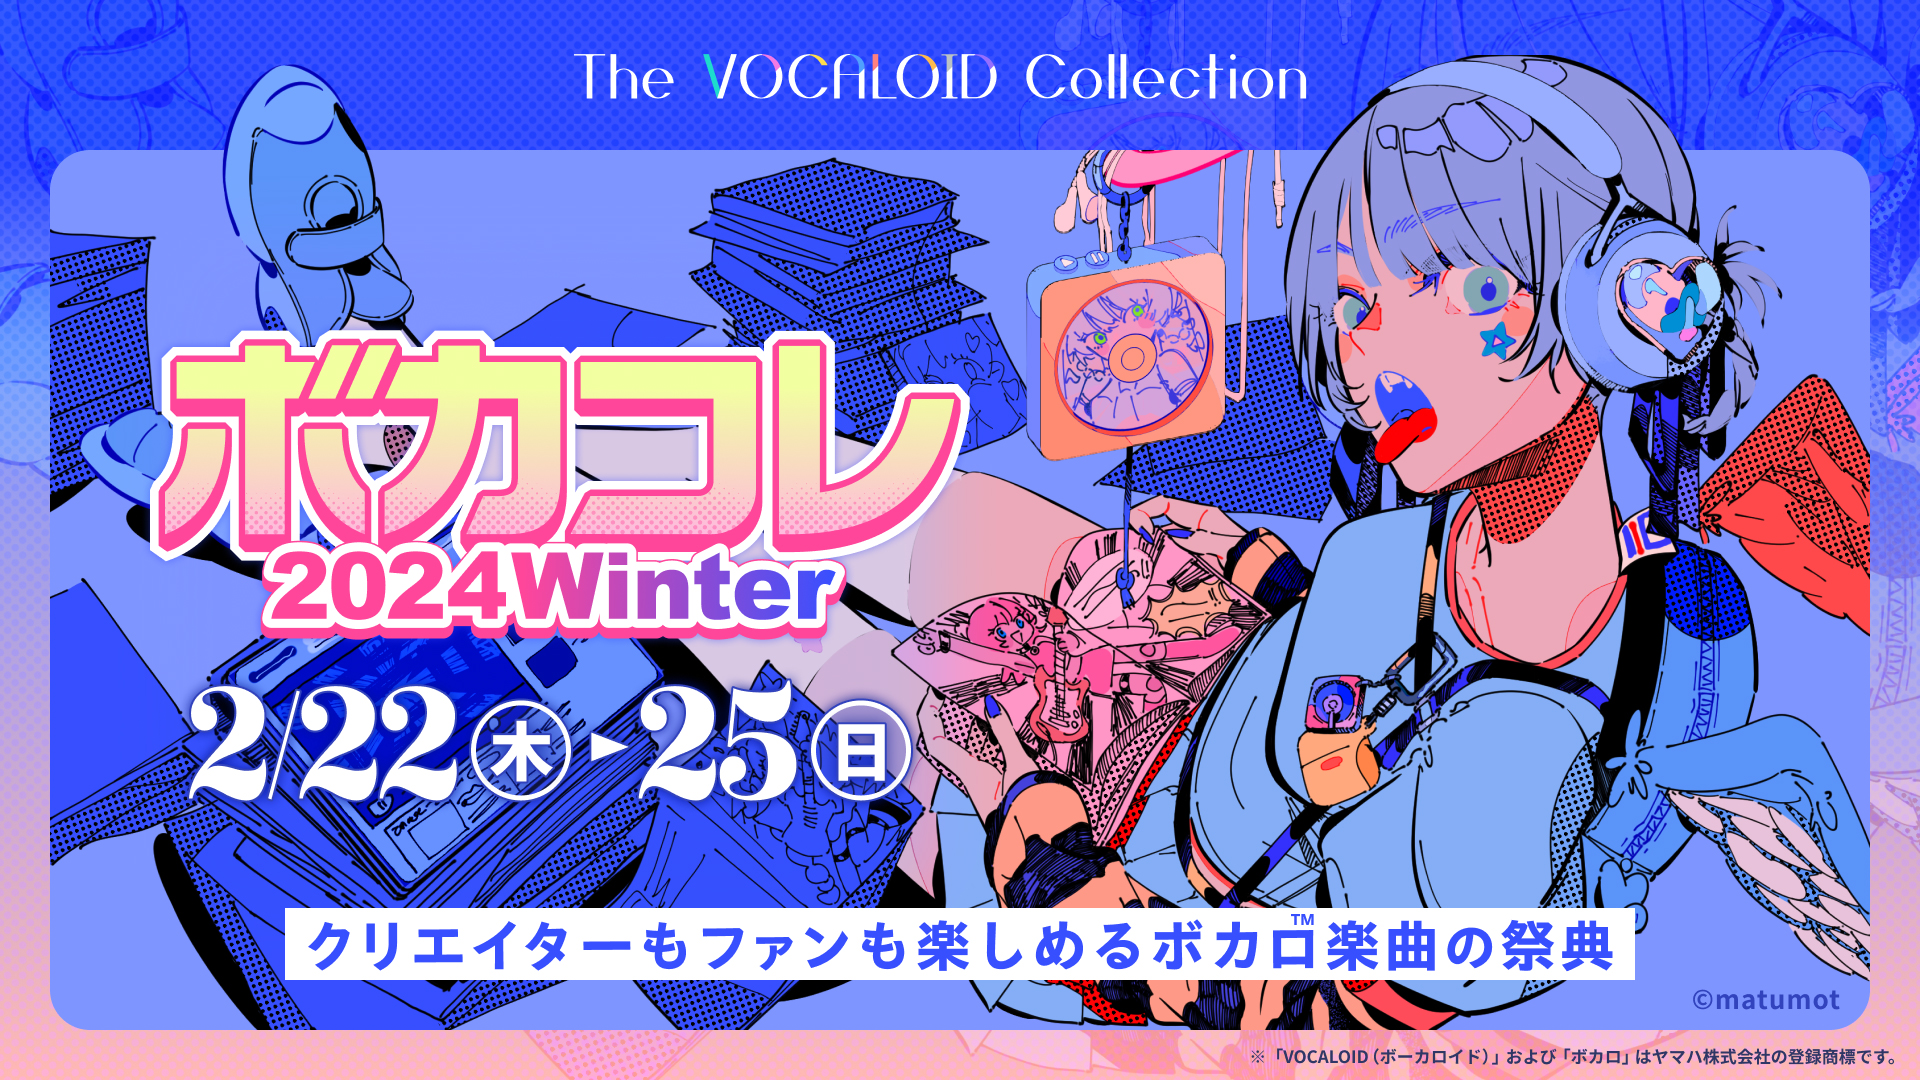 『The VOCALOID Collection』特集